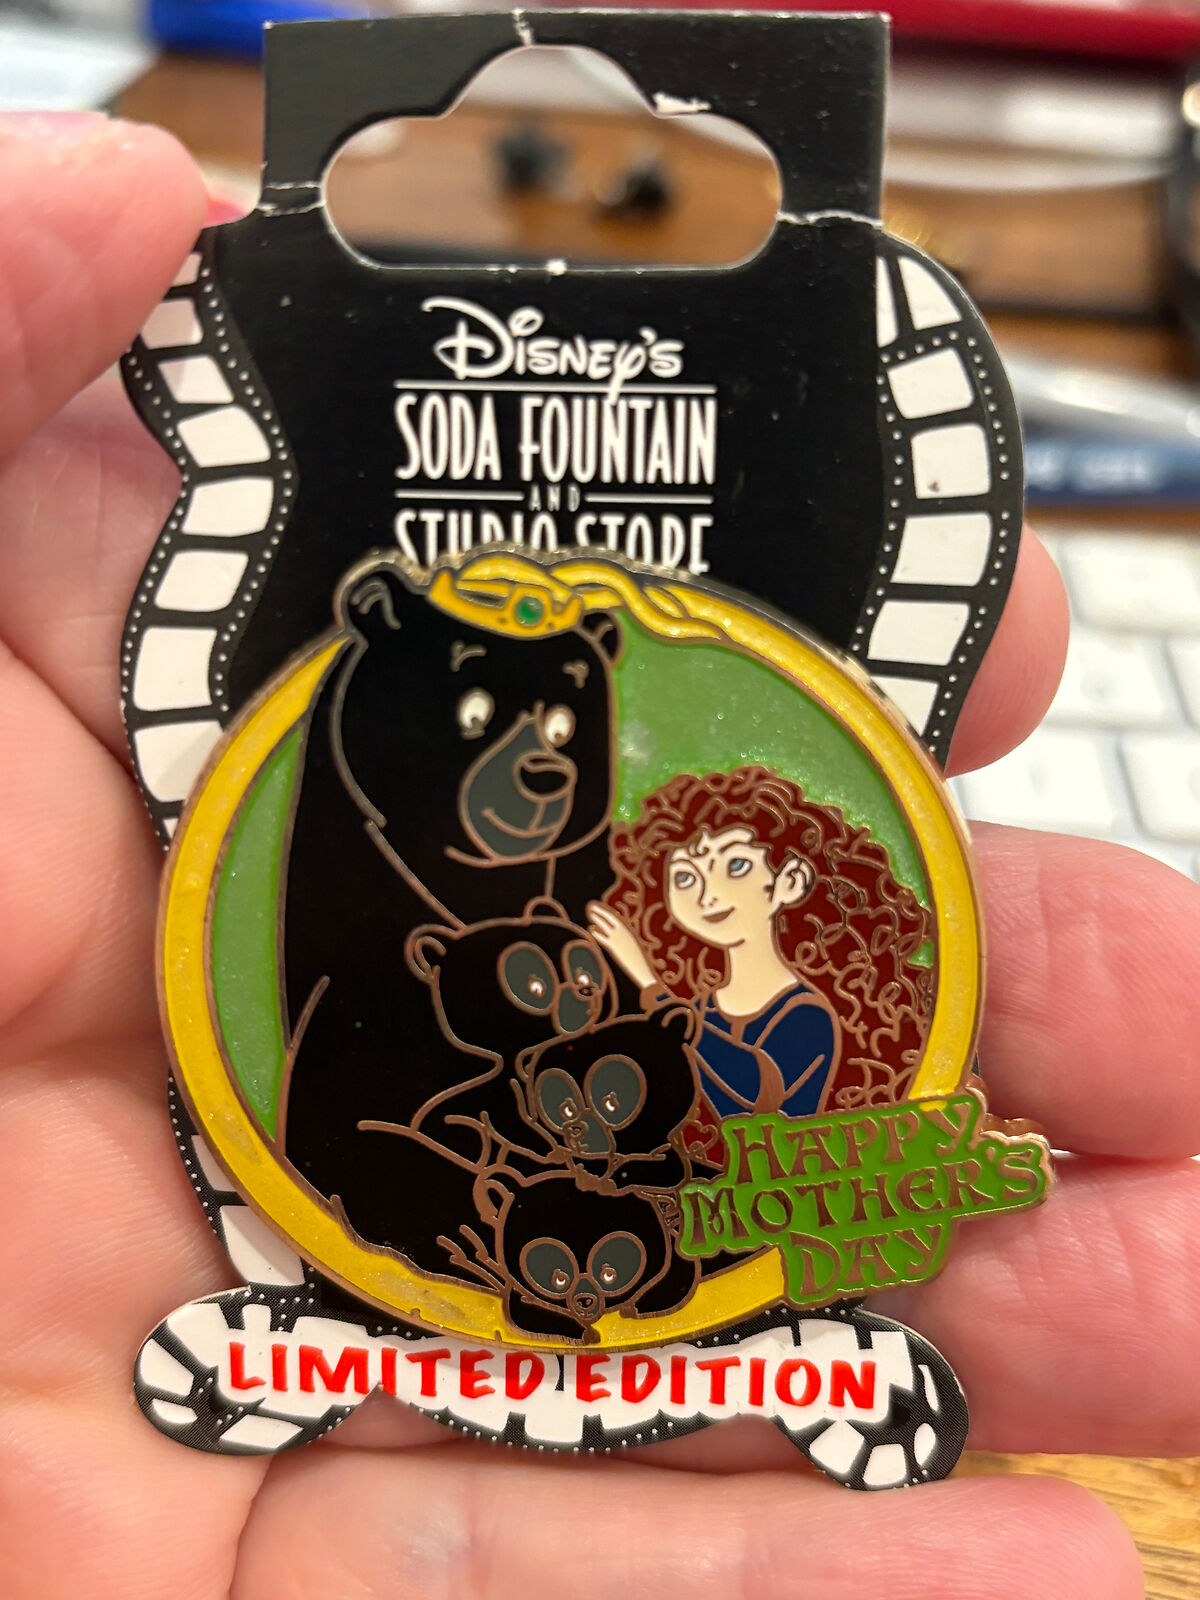 Disney Studio Store Hollywood - DSSH - Happy Mother's Day Pin Brave